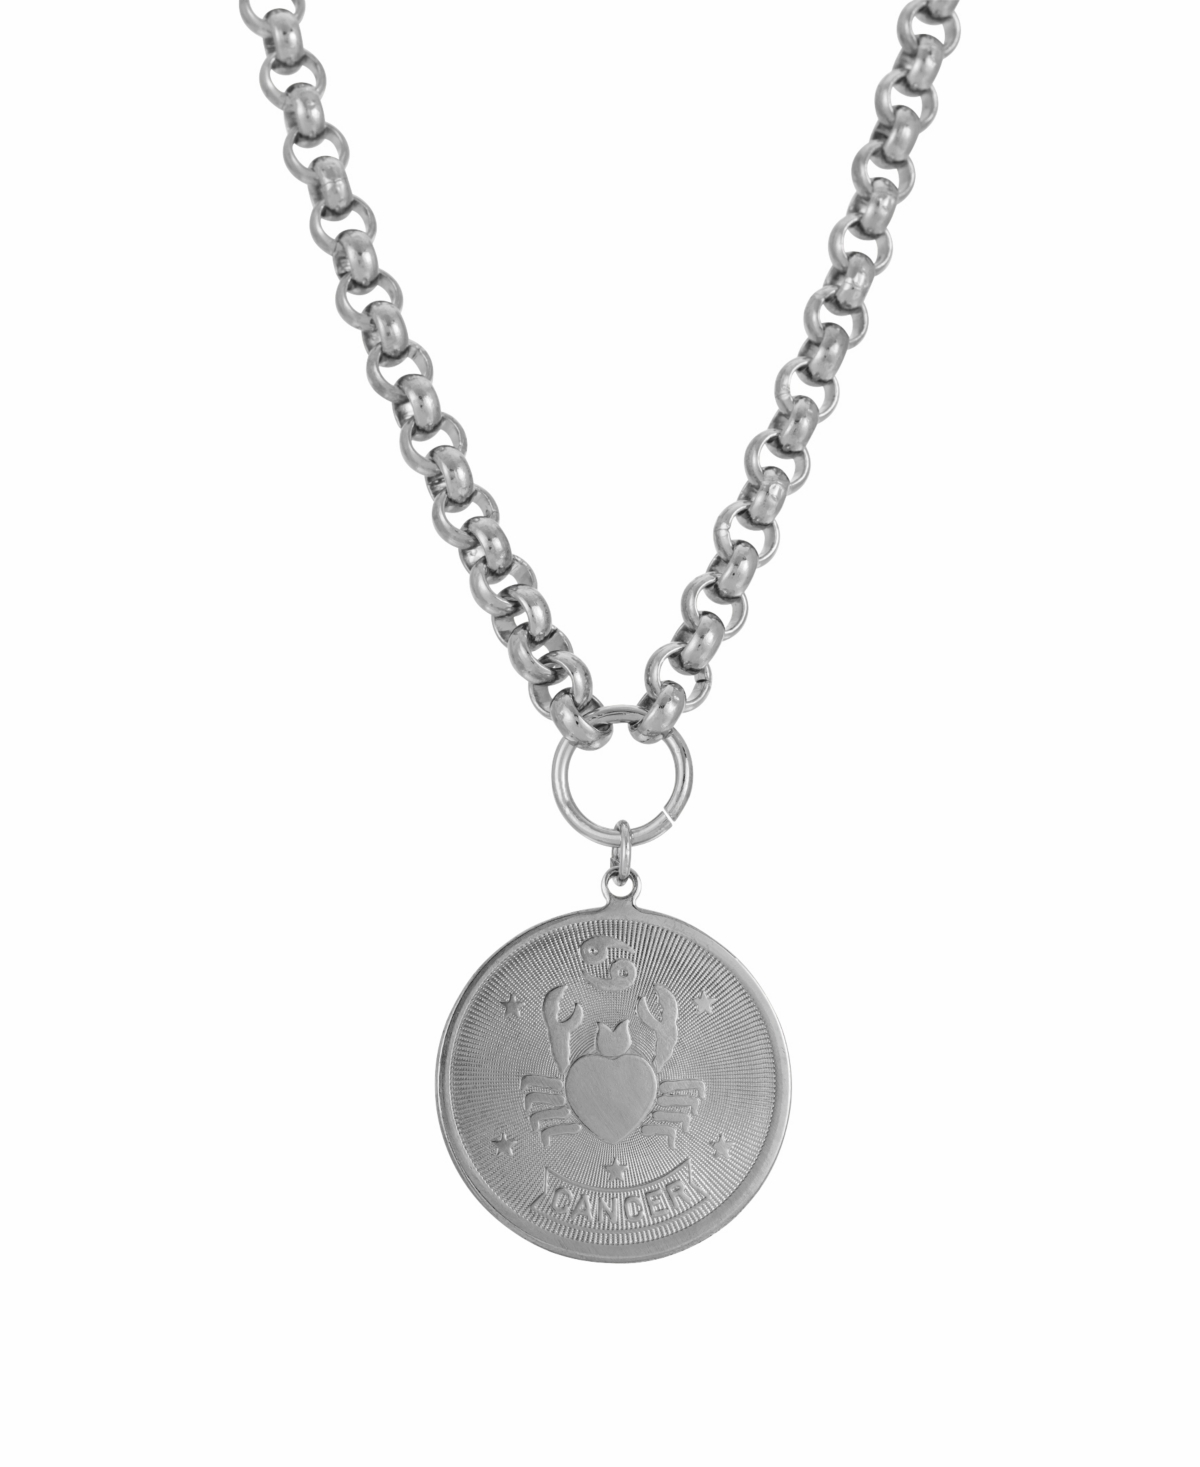 2028 Women's Round Cancer Pendant Necklace In Silver-tone